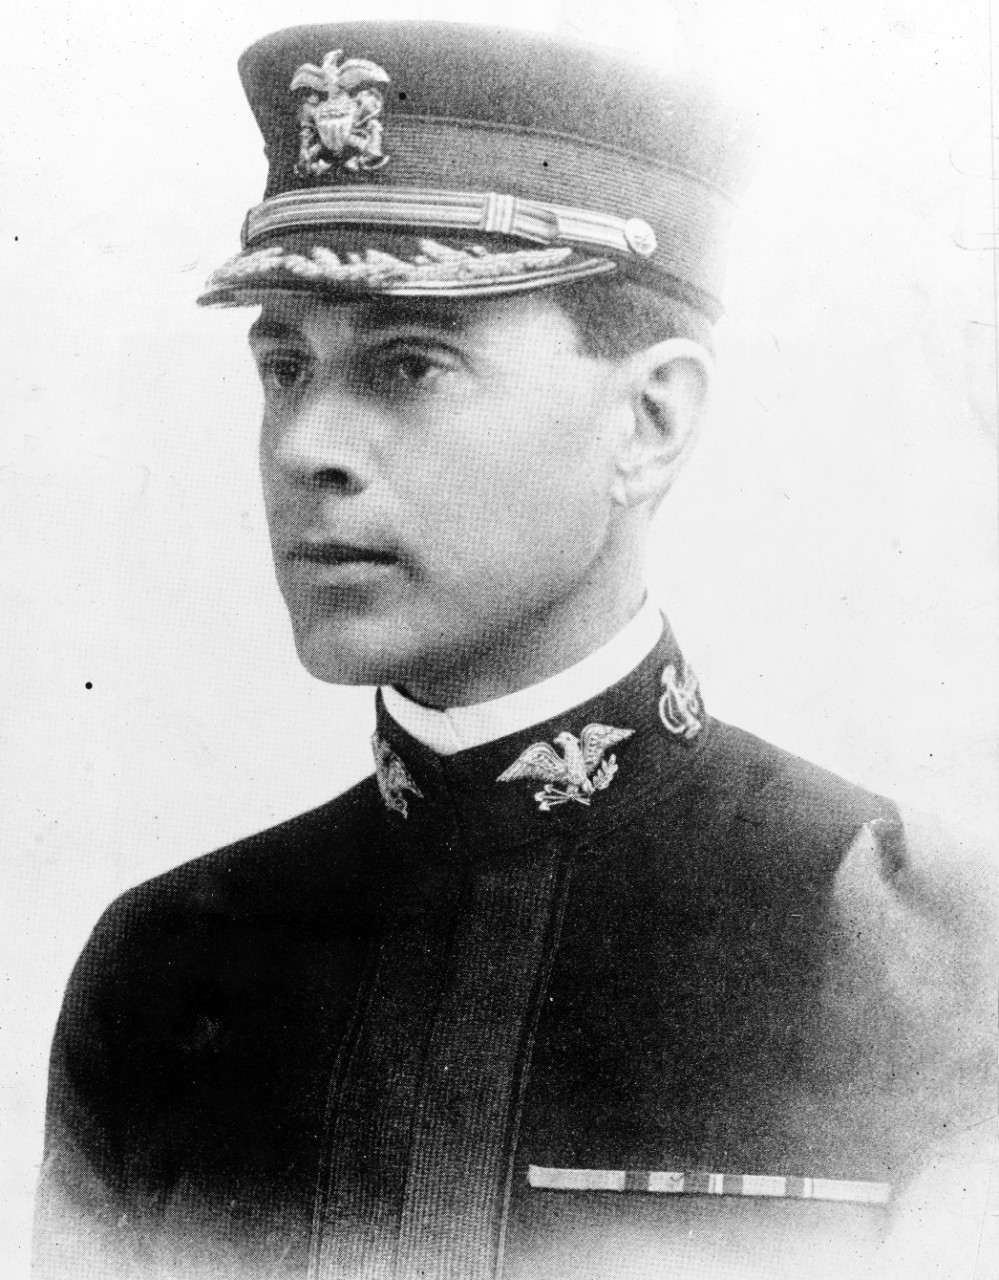 Captain Dudley W. Knox, USN, a World War I photograph taken while he was a member of the Planning Section, U.S. Naval Forces Operating in European Waters